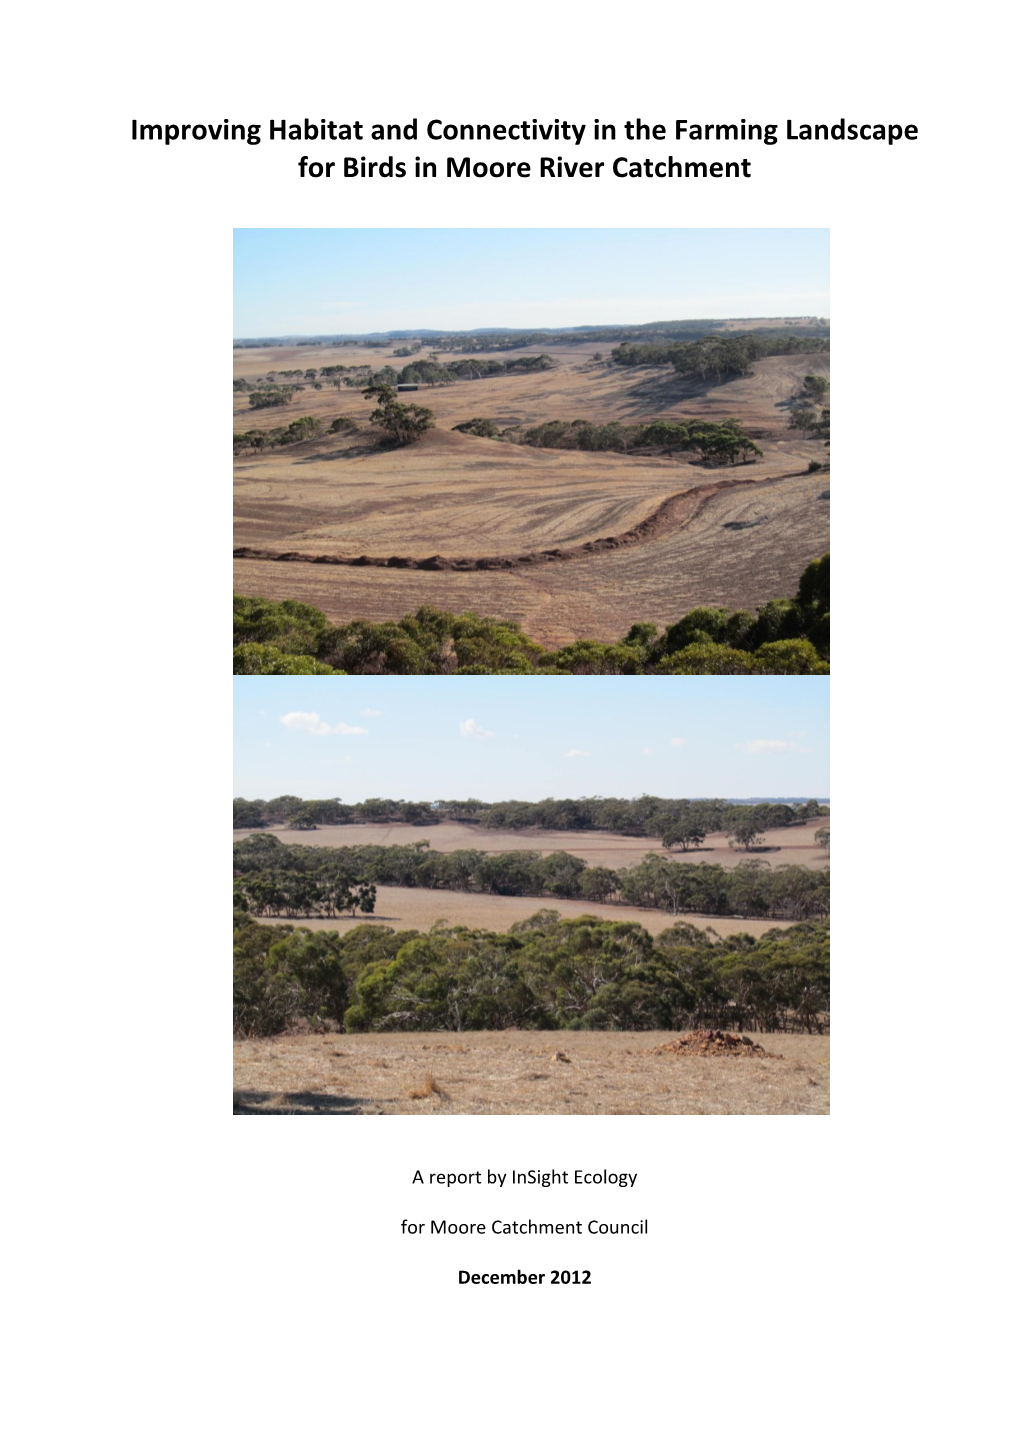 Improving Habitat and Connectivity in the Farming Landscape for Birds in Moore River Catchment